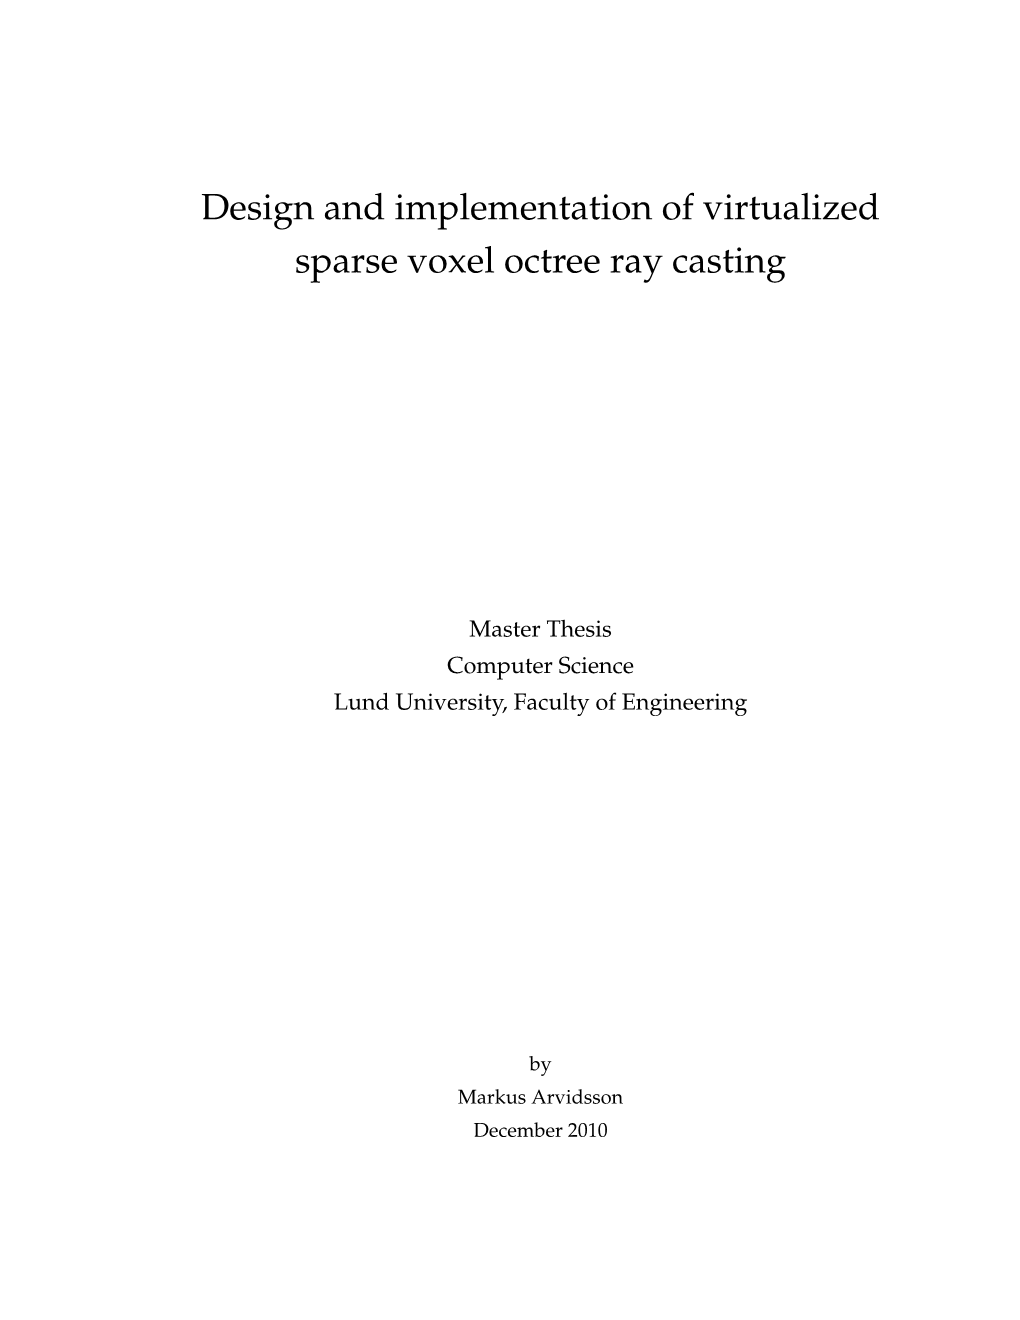 Design and Implementation of Virtualized Sparse Voxel Octree Ray Casting